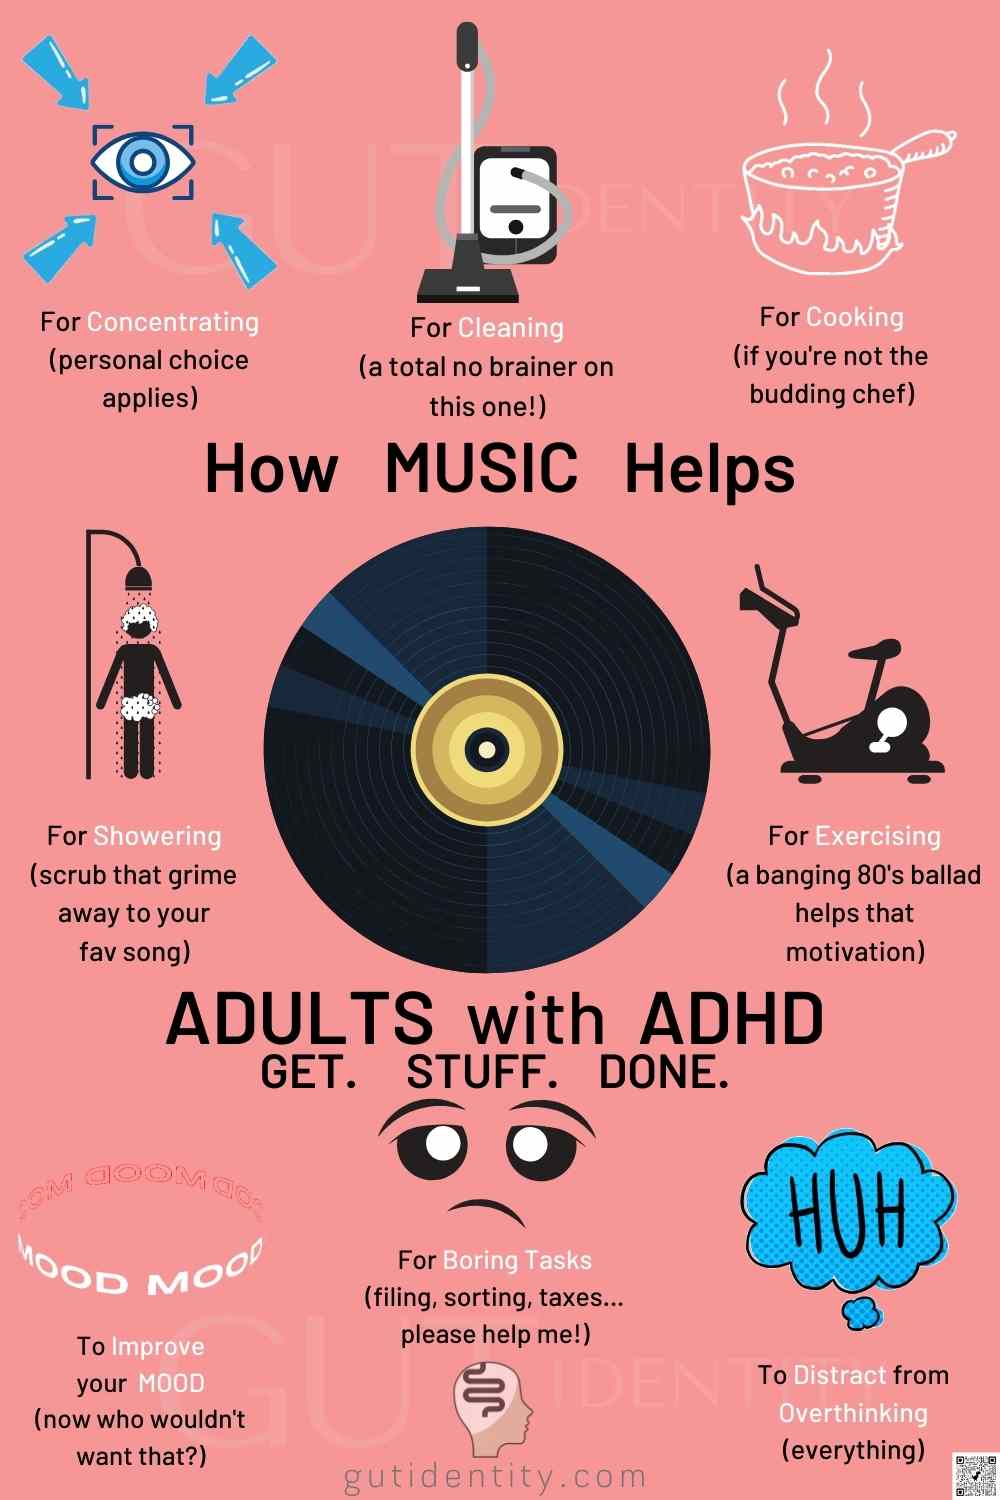 How Music Helps Adults with ADHD Get Stuff Done by Gutidentity